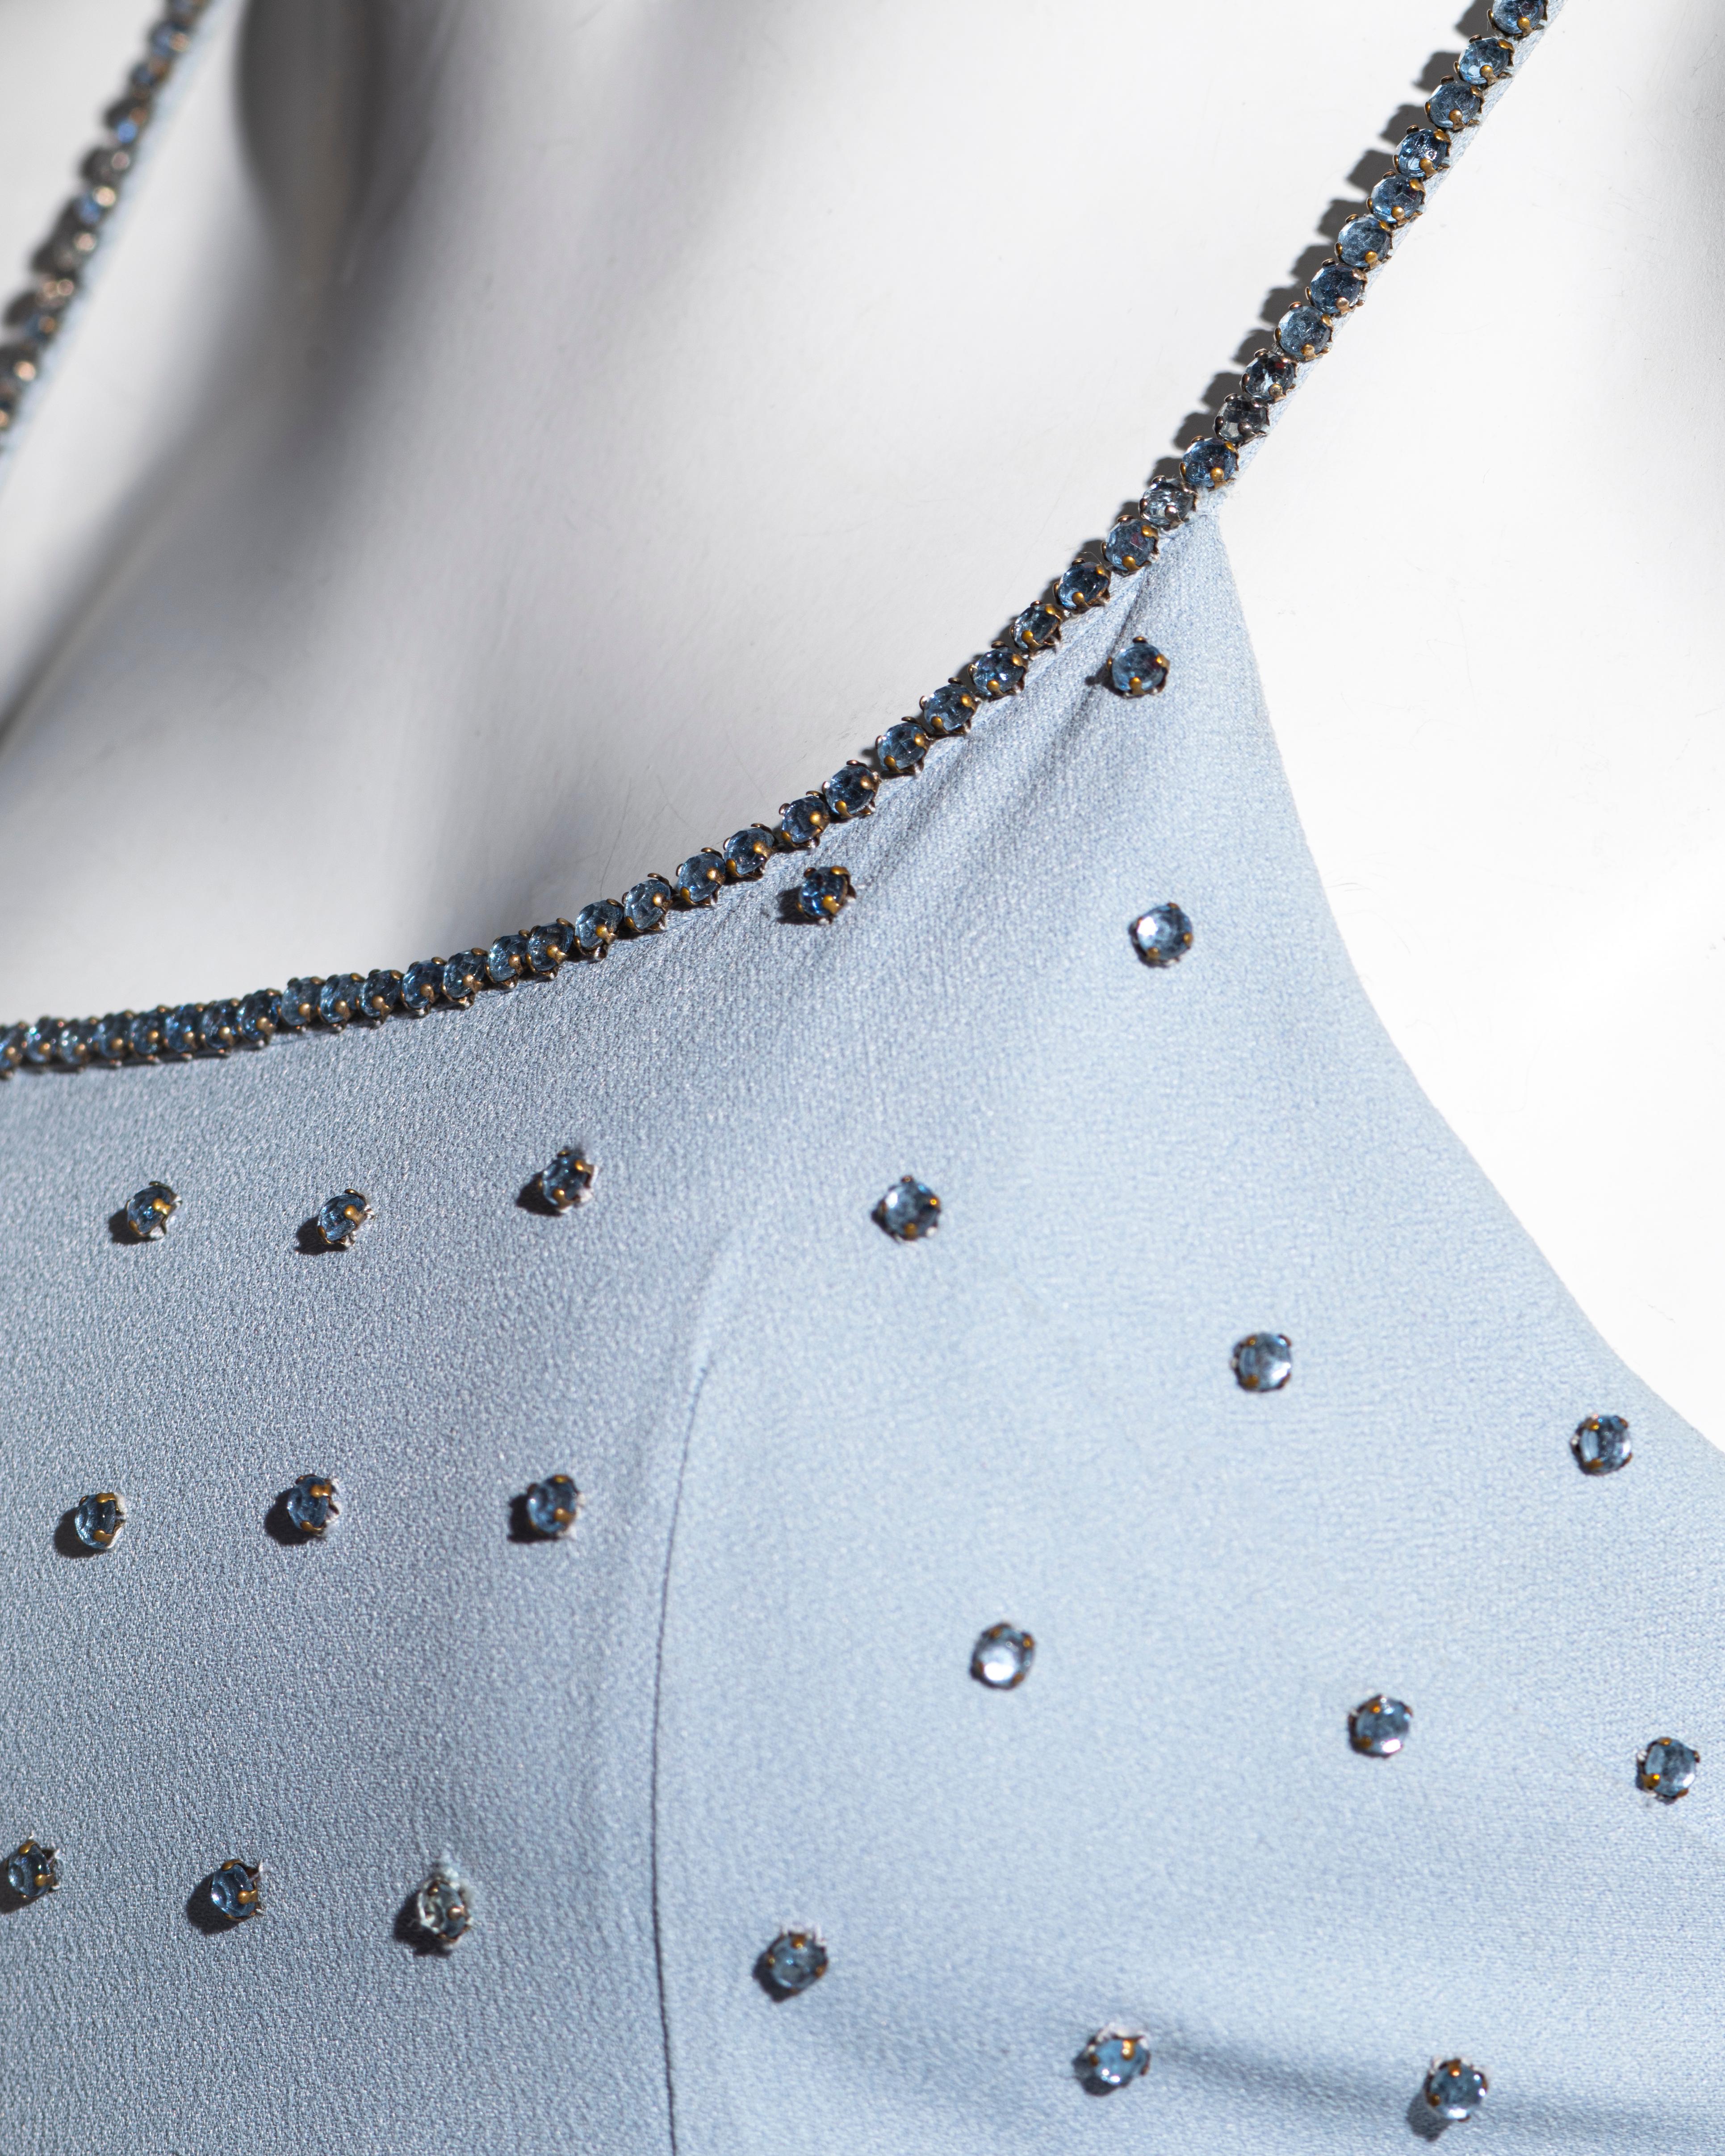 Women's Dolce & Gabbana powder blue crepe evening dress adorned with crystals, ss 1995